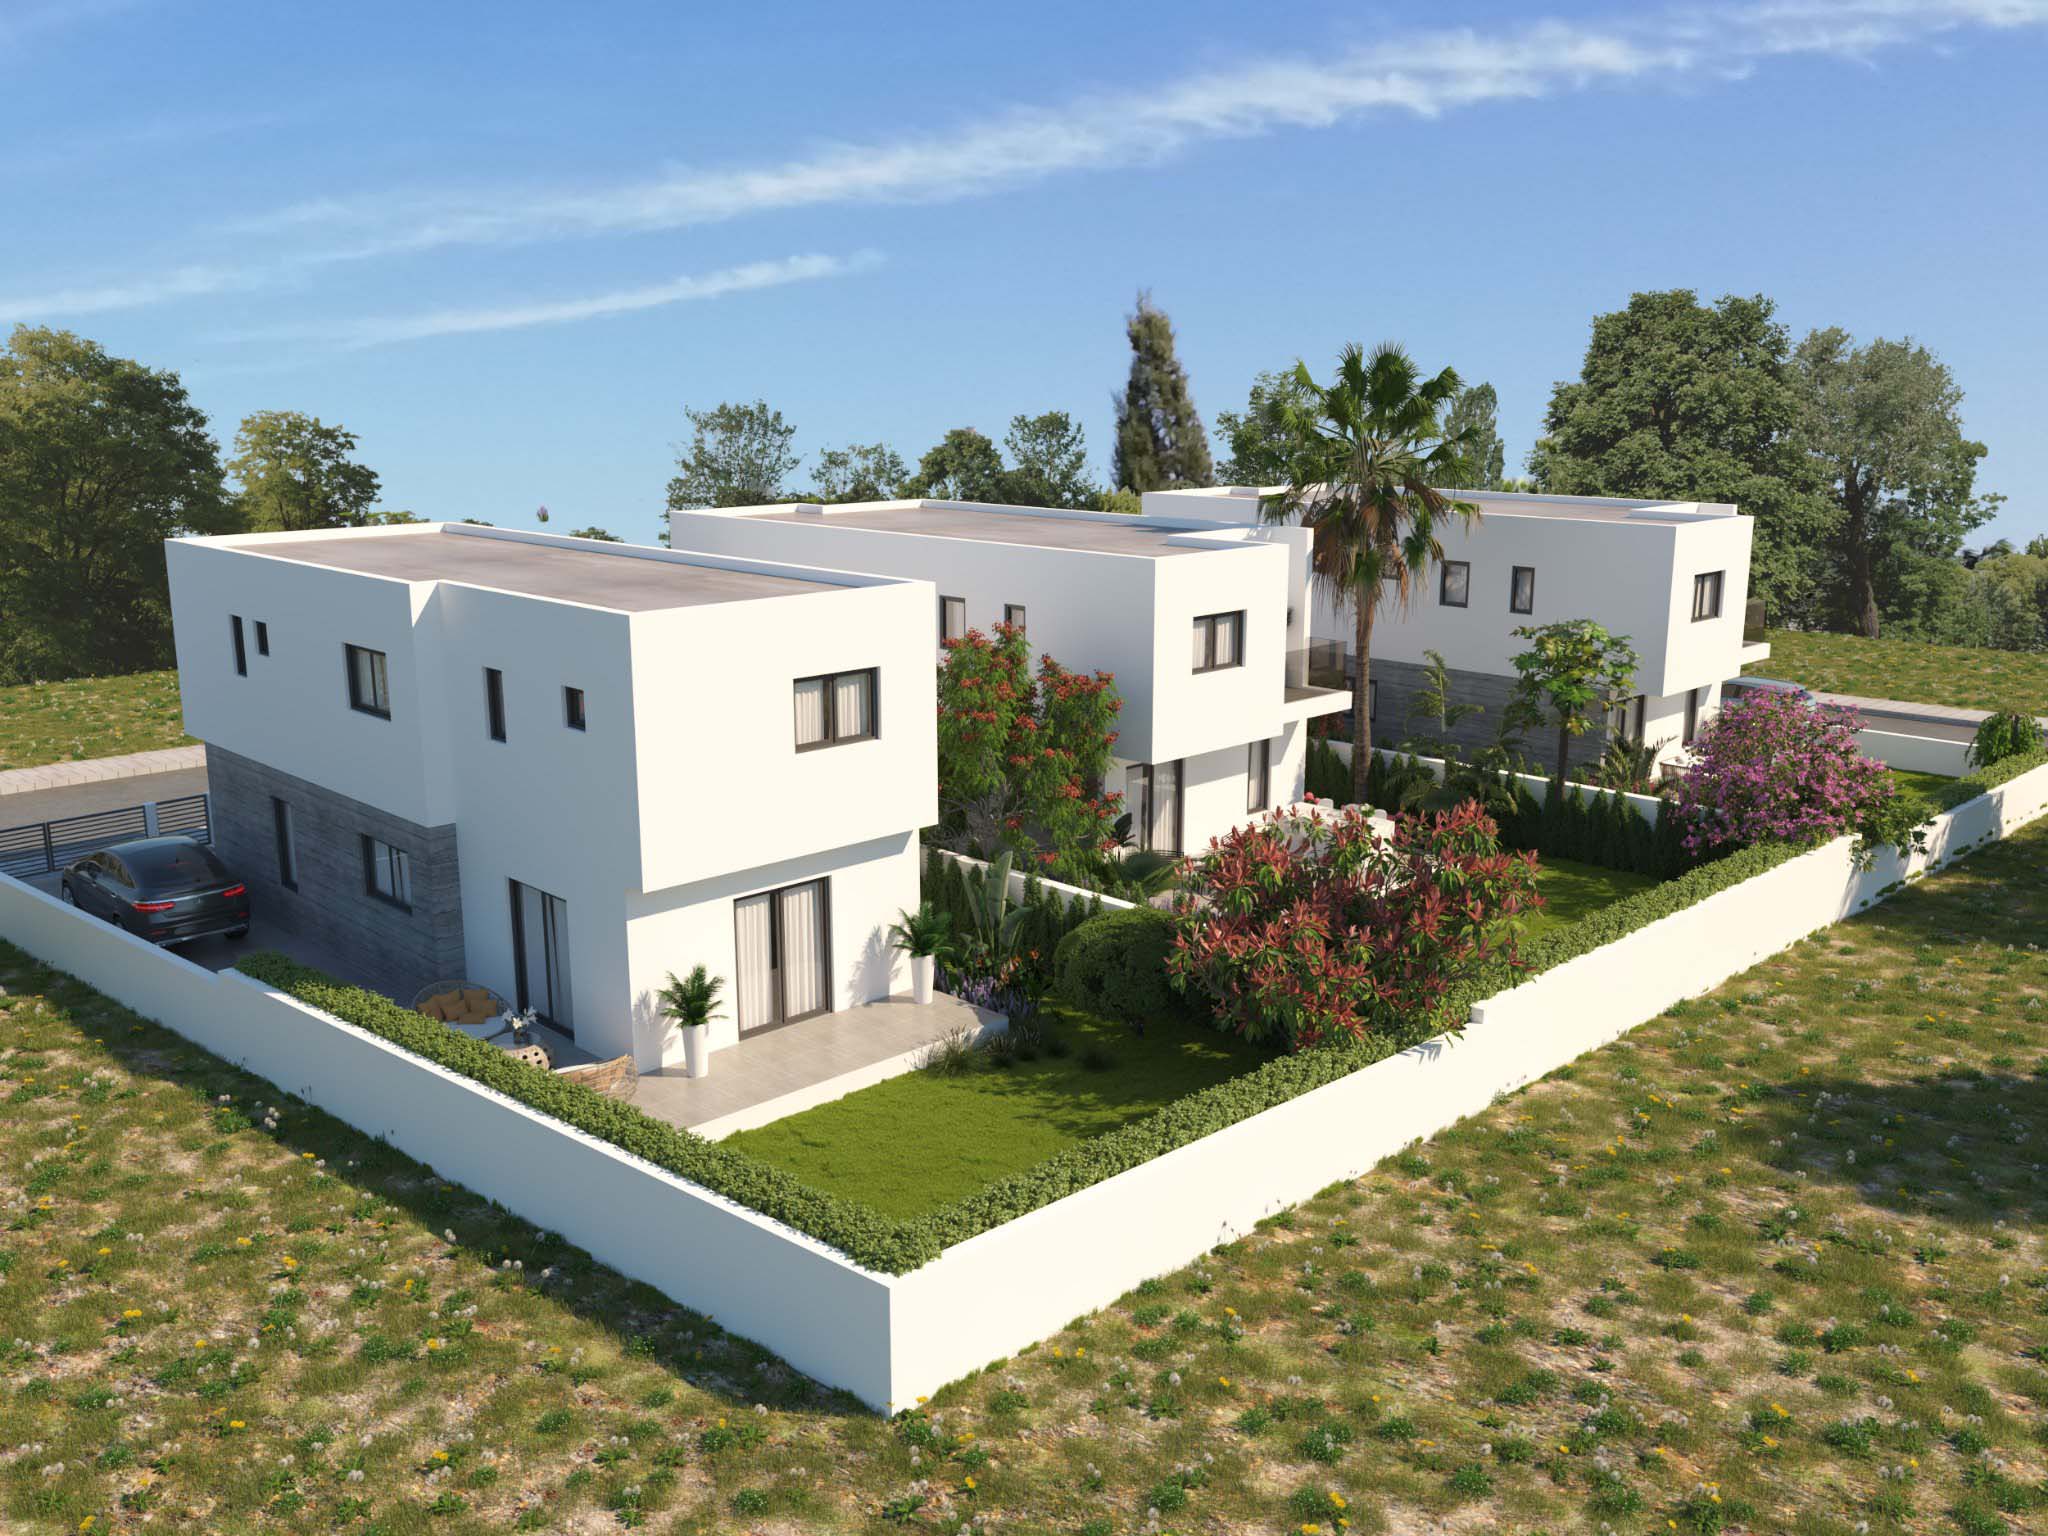 4 Bedroom House for Sale in Geroskipou, Paphos District